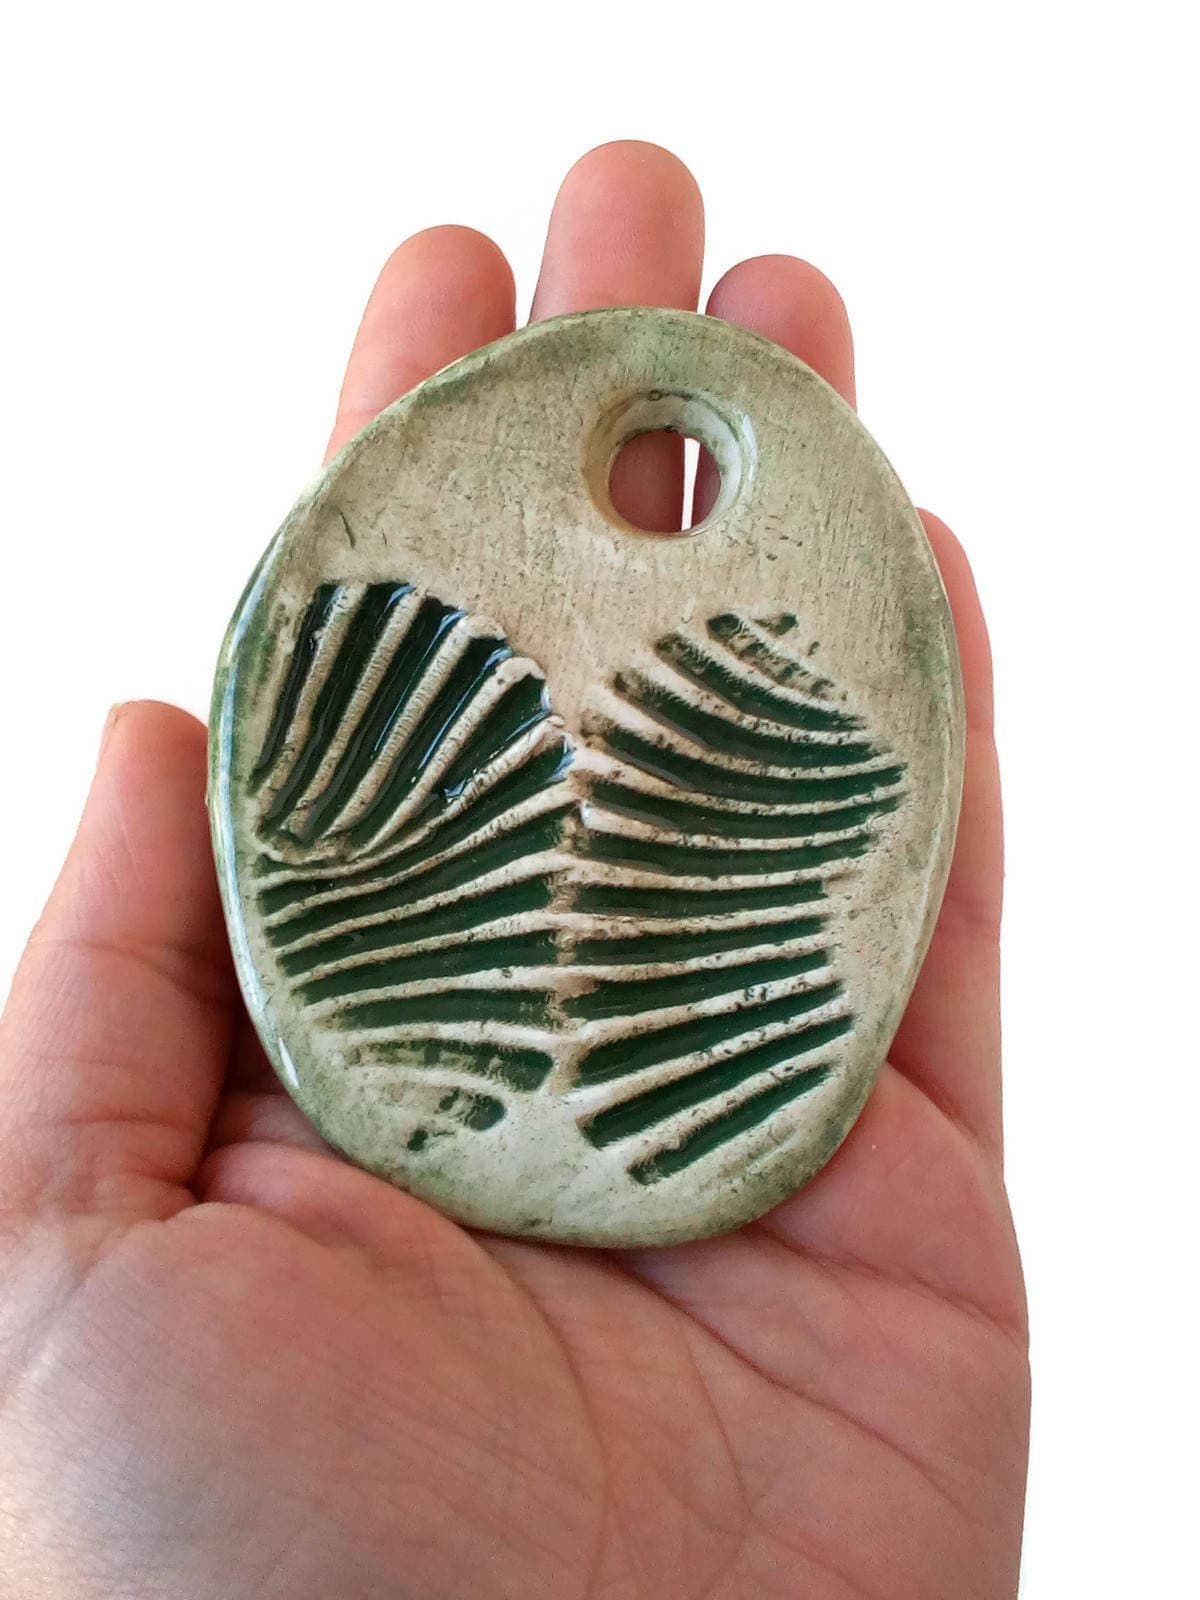 1Pc 80mm Extra Large Green Necklace Pendant For Statement Jewelry Making, Rustic Handmade Ceramic Chunky Clay Charms For Women - Ceramica Ana Rafael